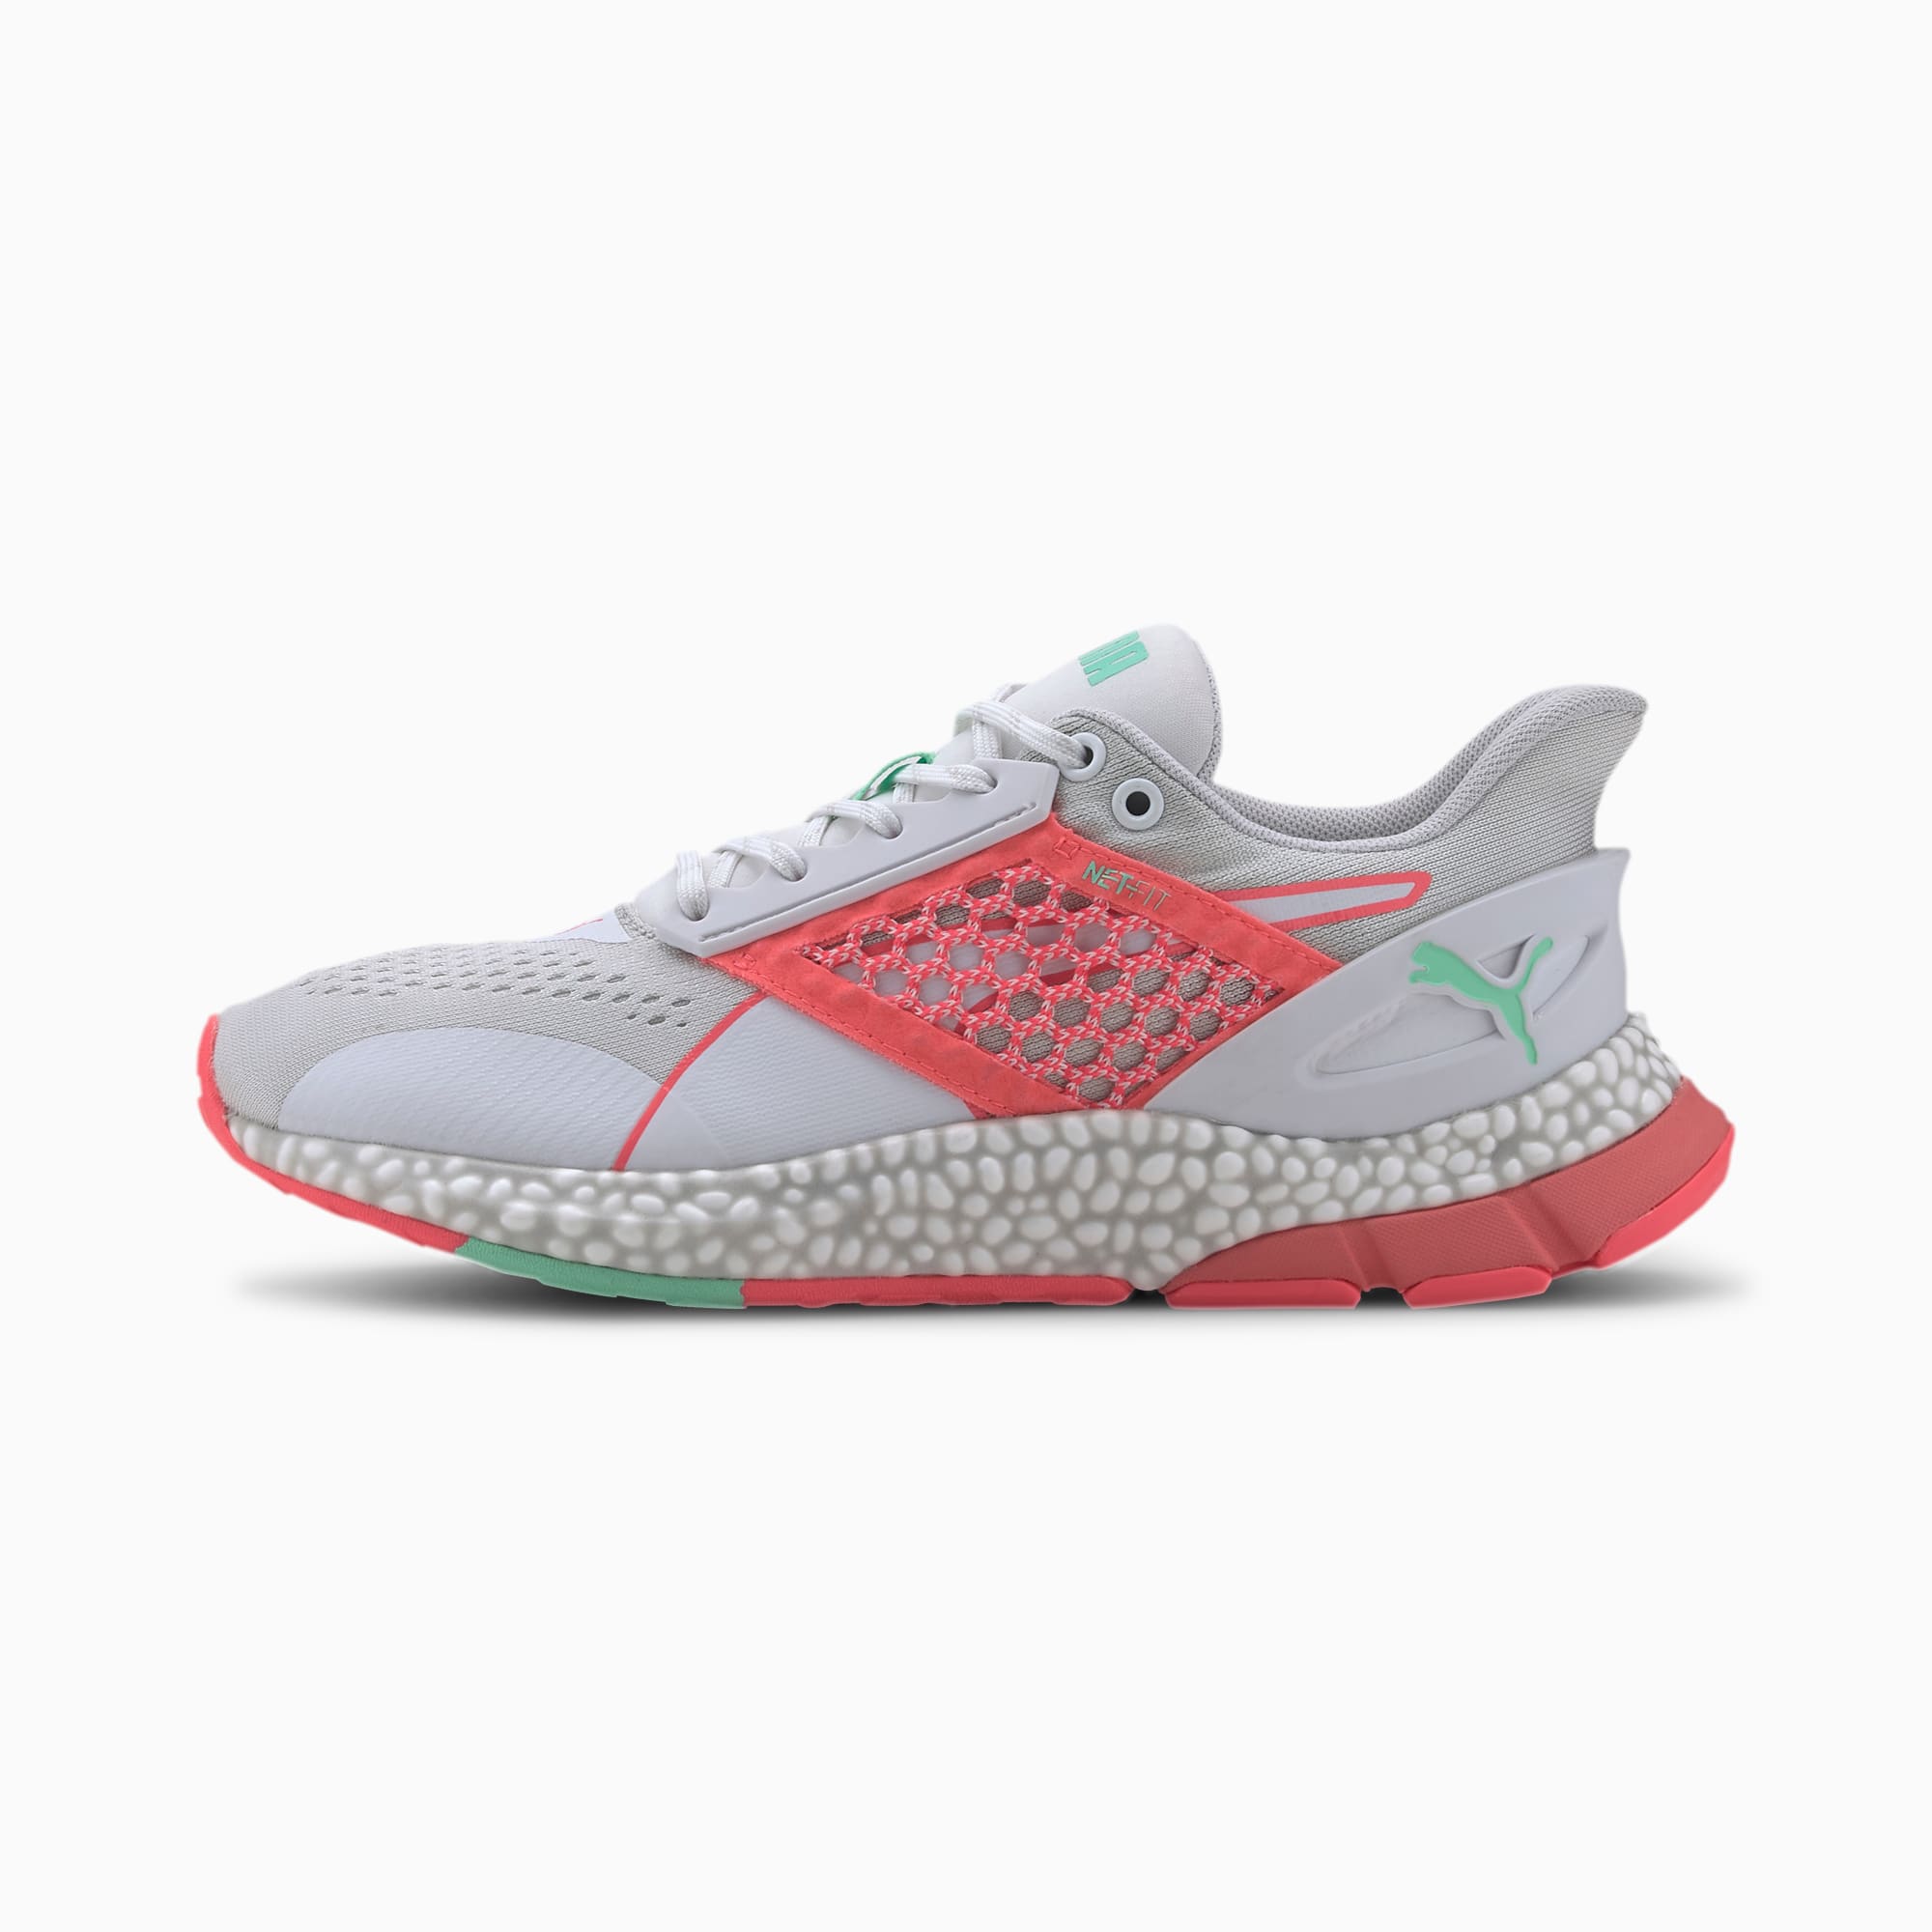 HYBRID NETFIT Astro Women's Running Shoes, Puma White-Ignite Pink-Green Glimmer, large-SEA